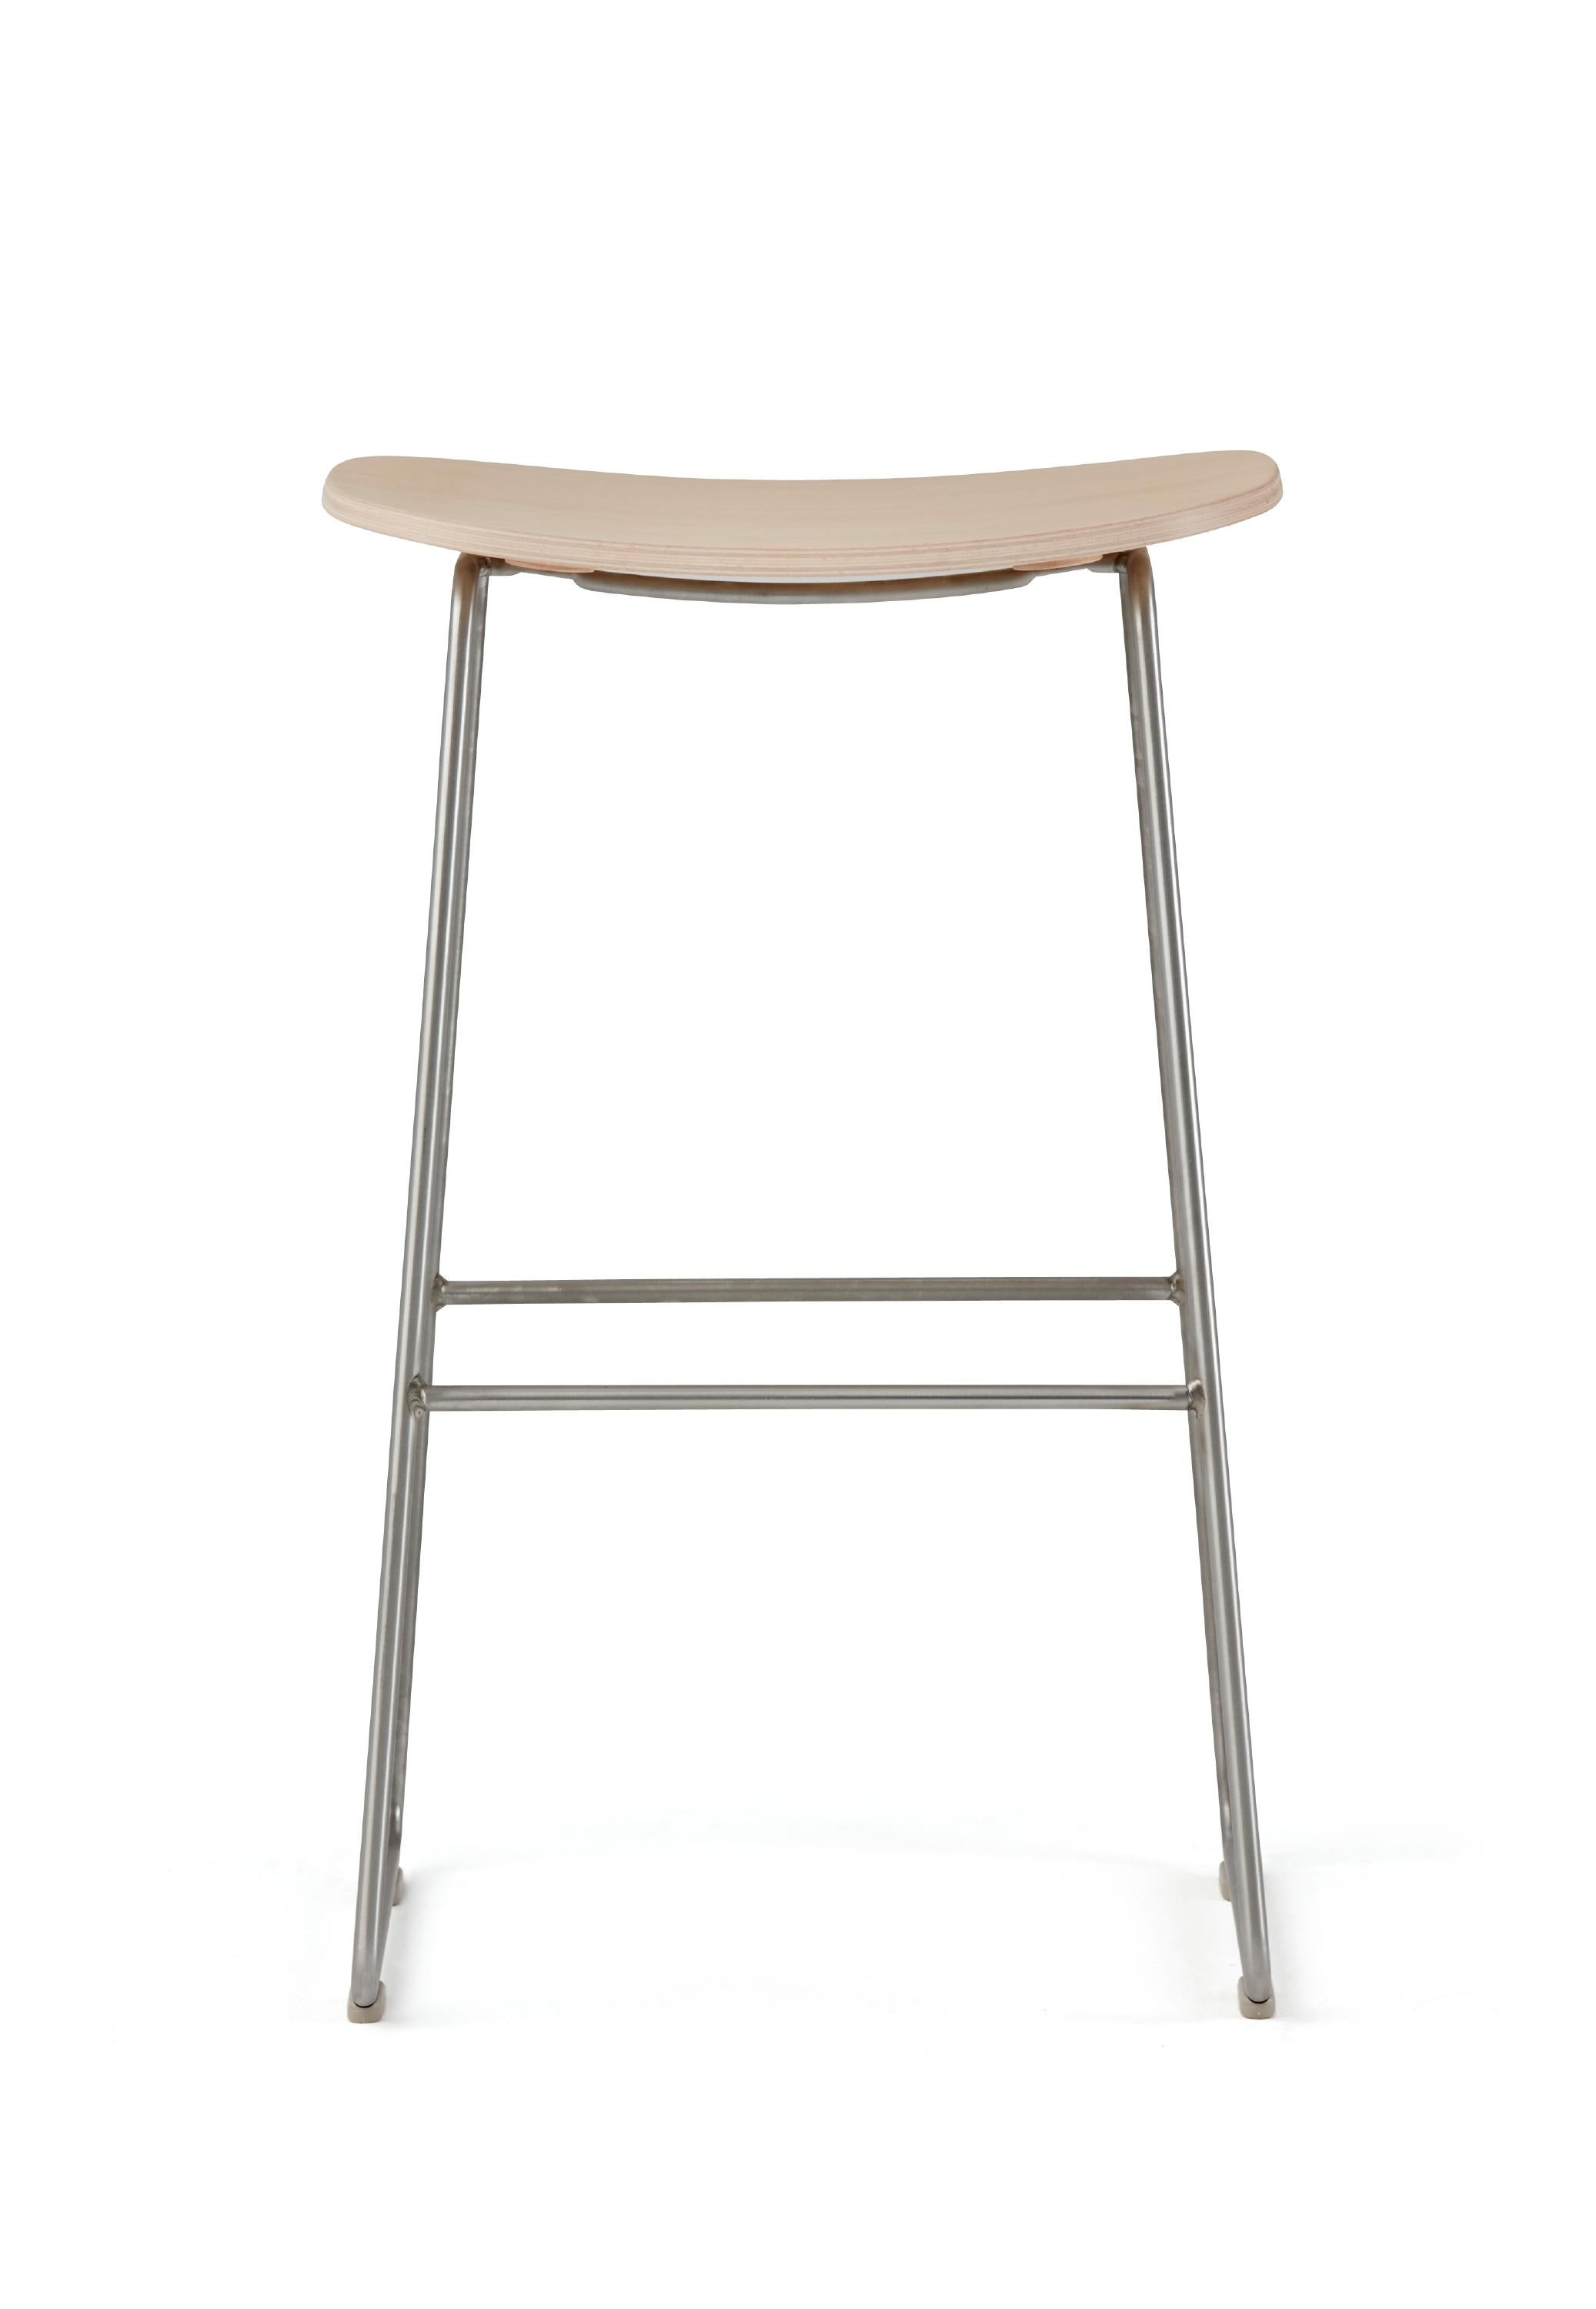 For Sale: Beige (113_Bleached Ash) Jasper Morrison Large Morrison Stool in Ash with Fabric or Leather